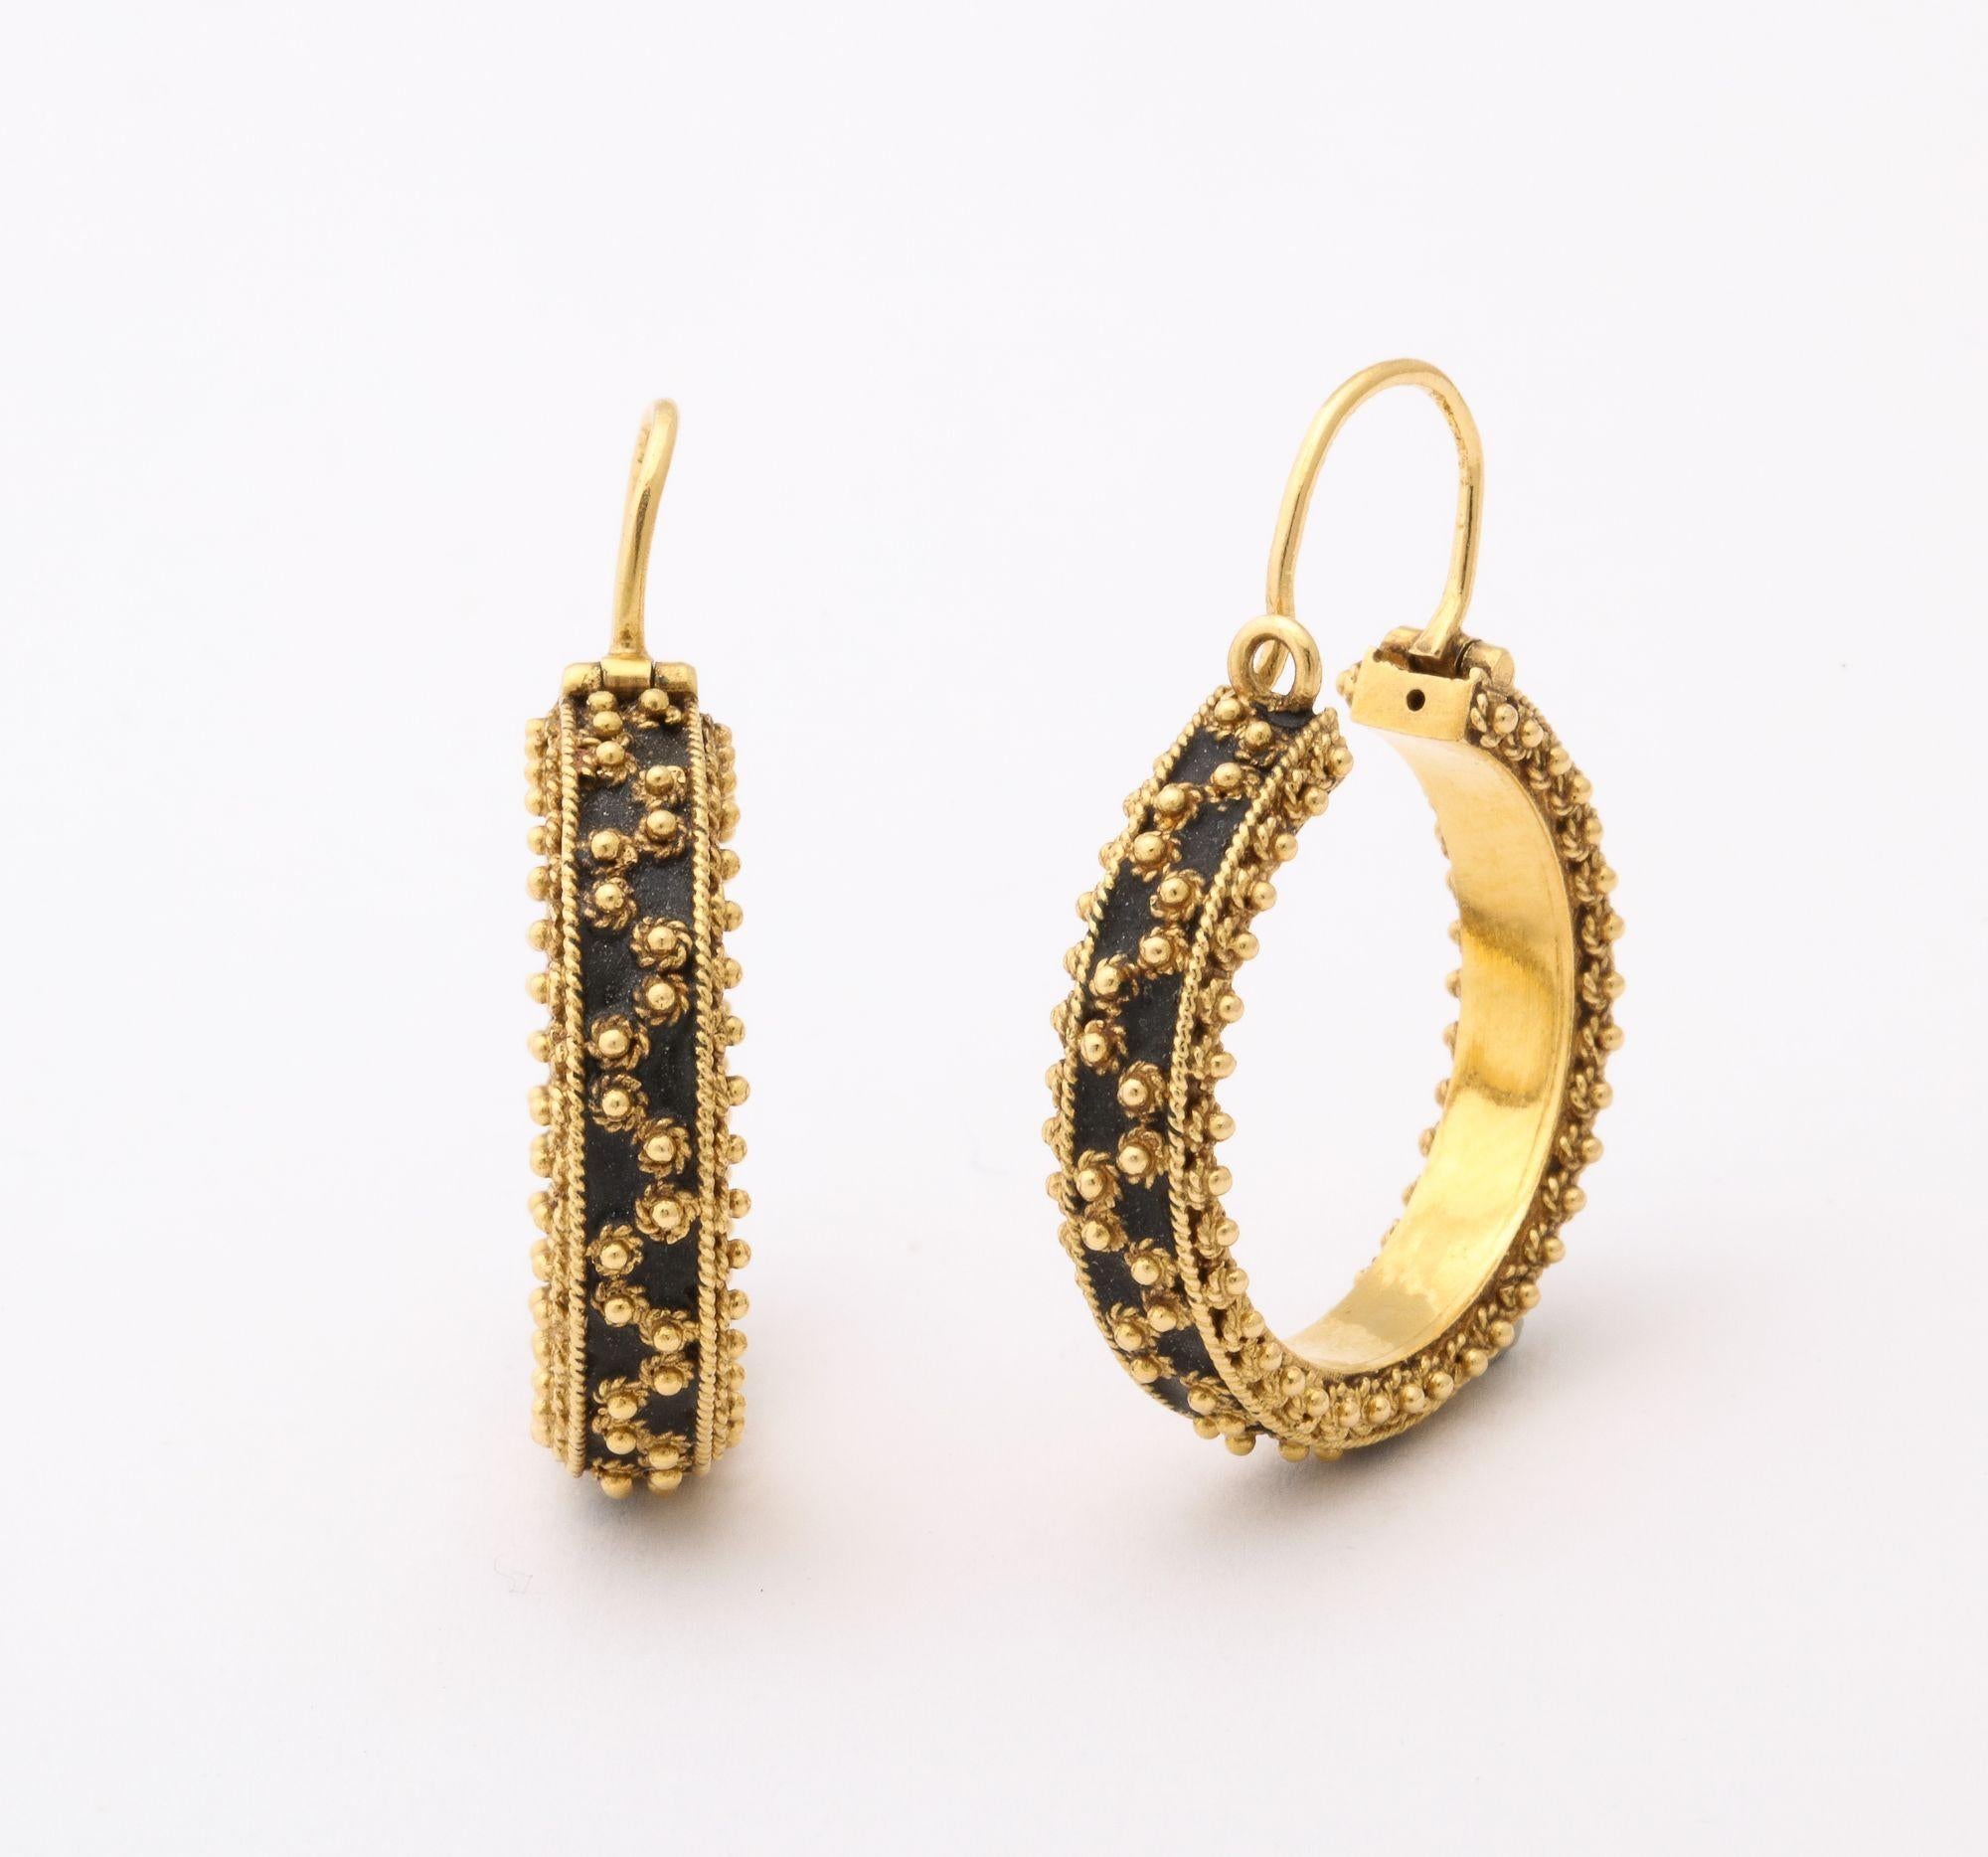 18 k Gold Articulated  Hoop Earrings With Bead Work For Sale 3